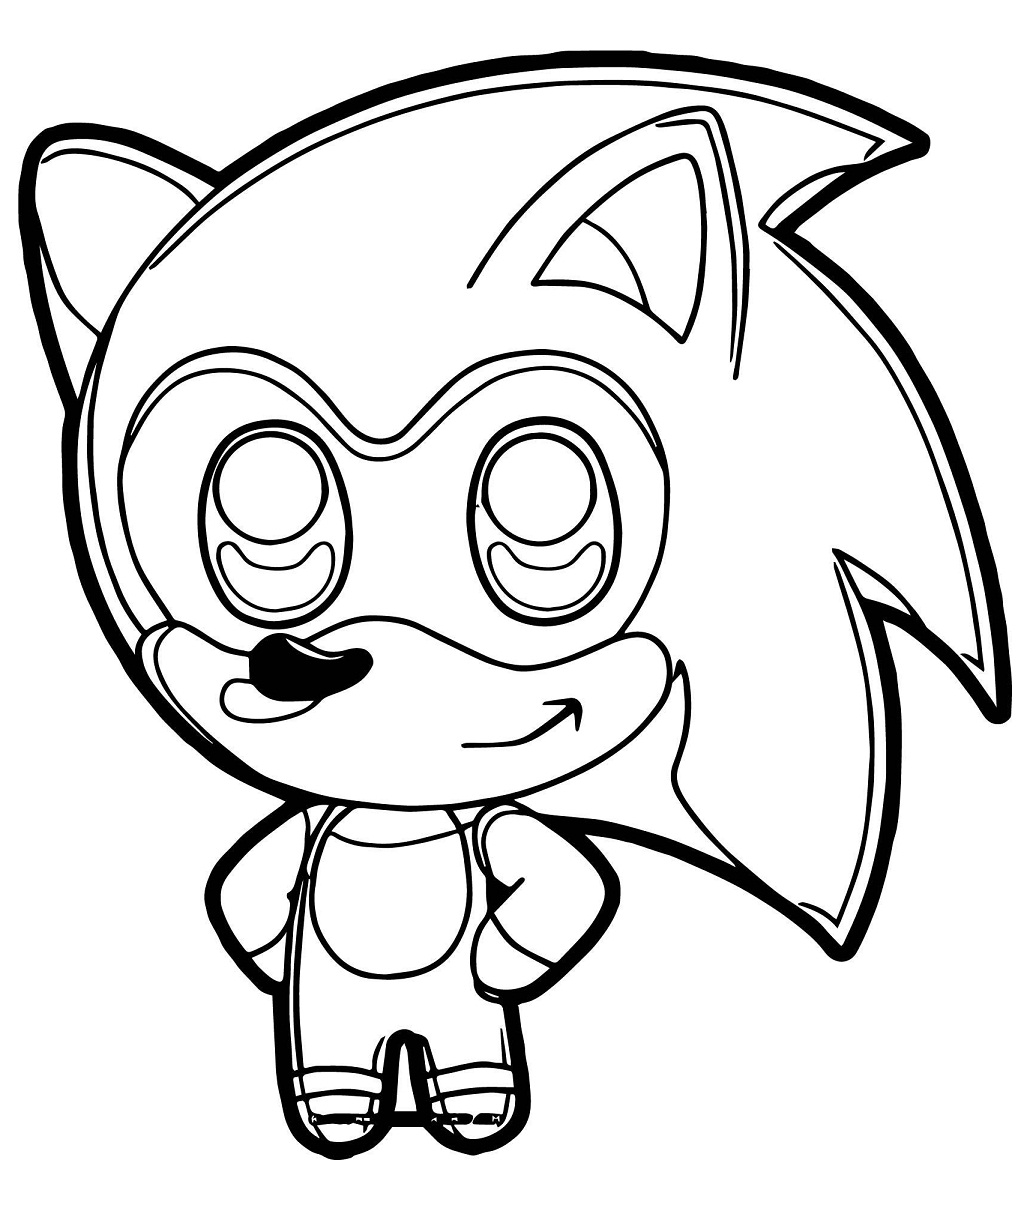 Printable Sonic Coloring Pages Printable Sonic Coloring Pages For Kids Lasnoticiasya4julio